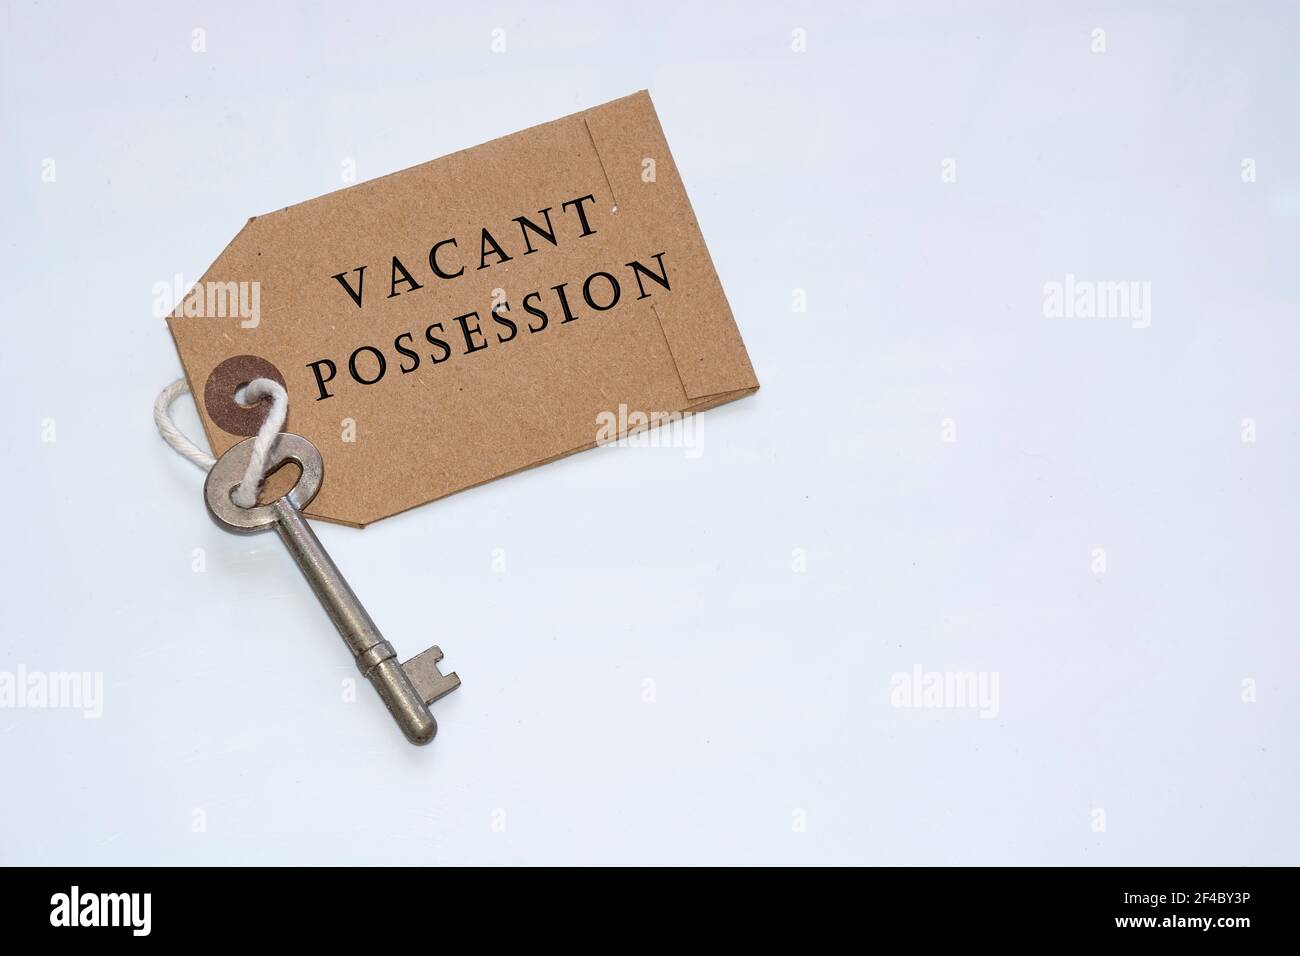 Text on a tag with key - Vacant possession Stock Photo